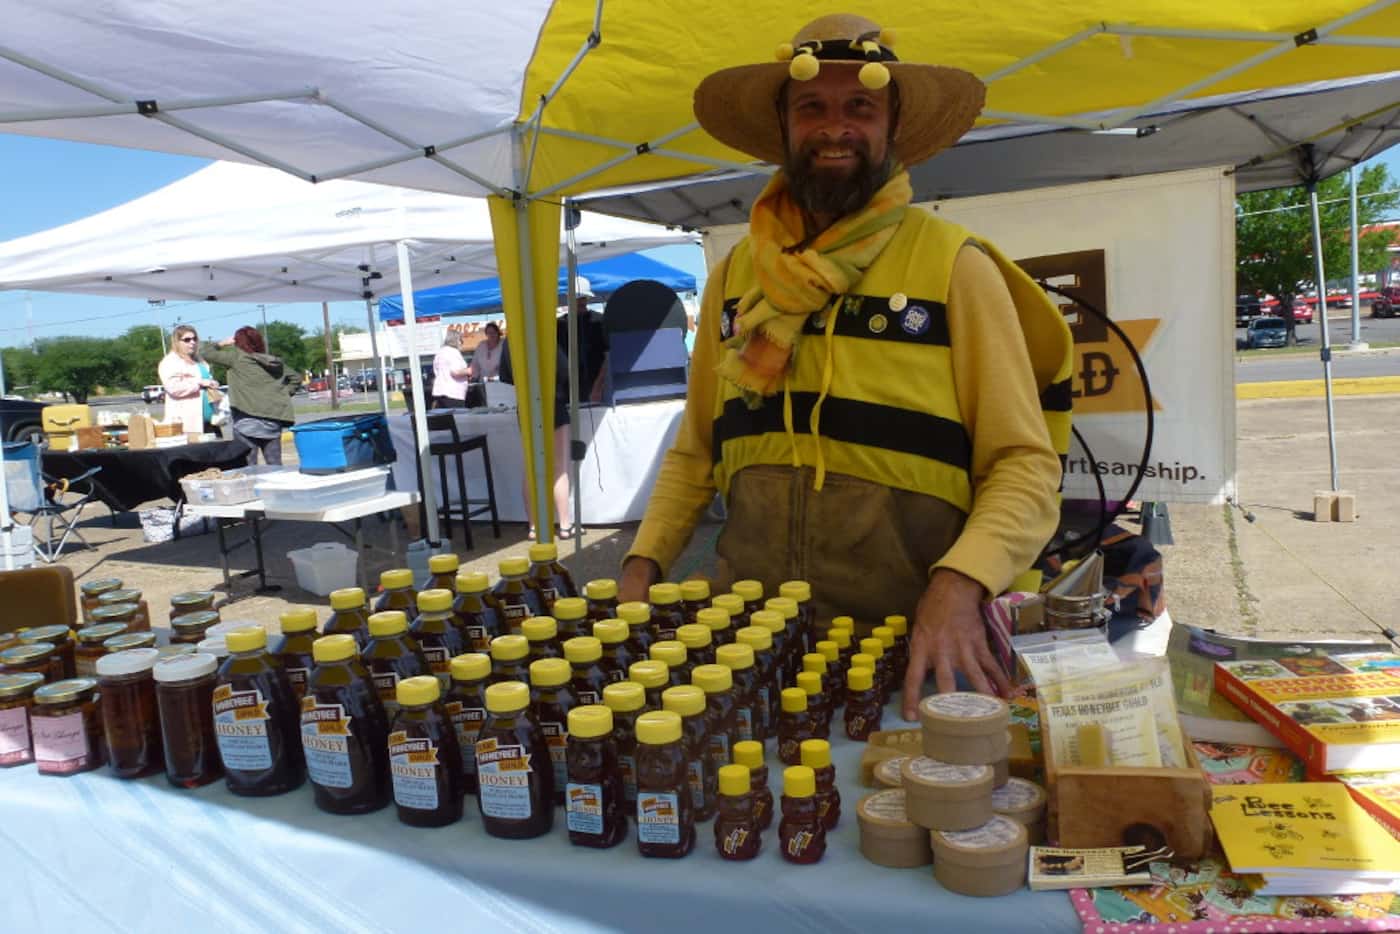 Texas Honeybee Guild co-owner Brandon Pollard in his bee-coming outfit. These guys make ZIP...